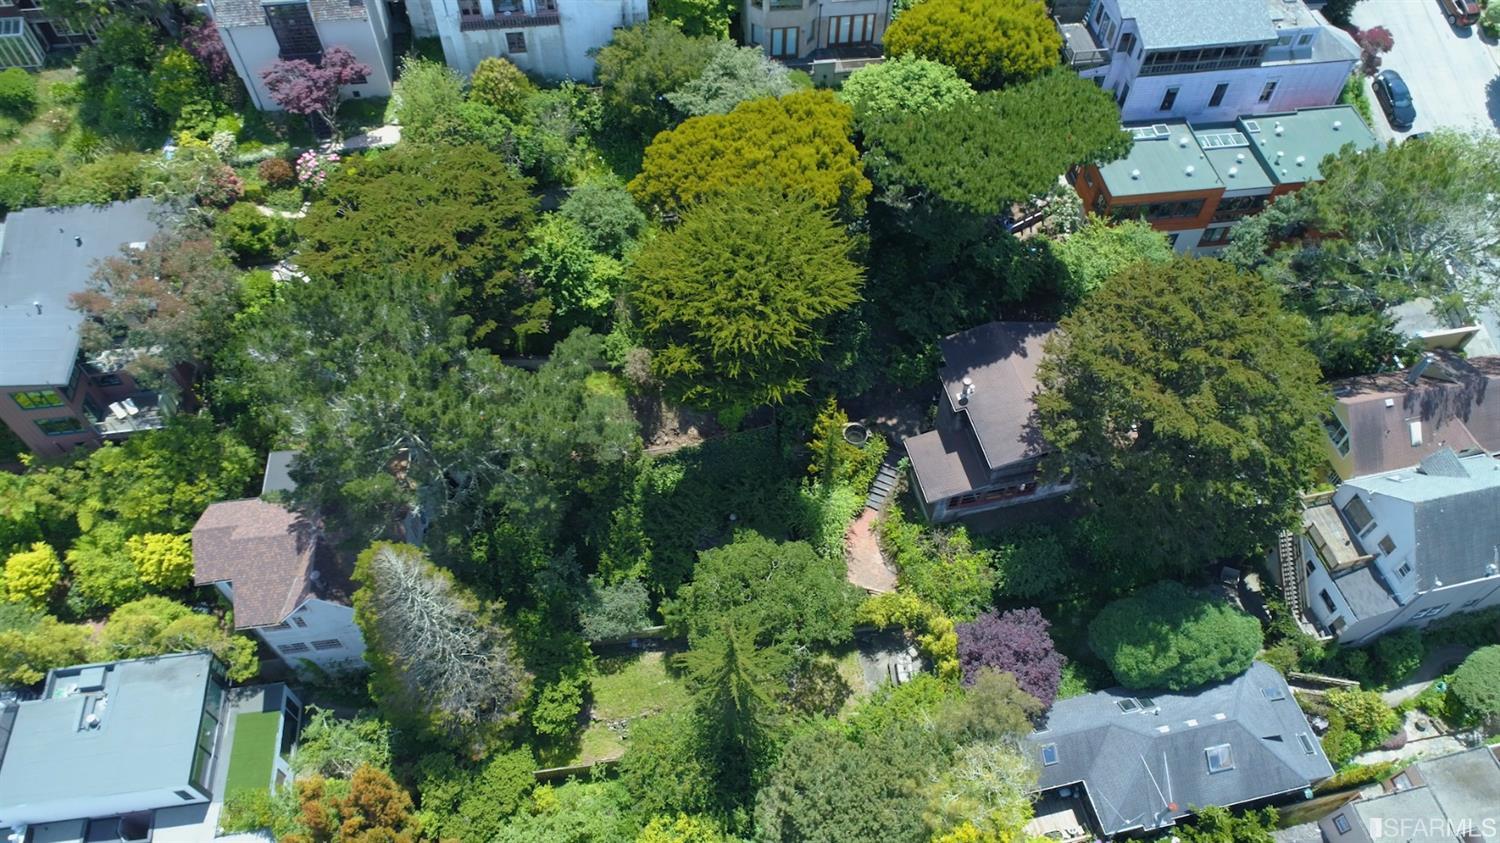 Property Photo: Aerial view of 1284 Stanyan Street, showing a wooded area surrounding a home